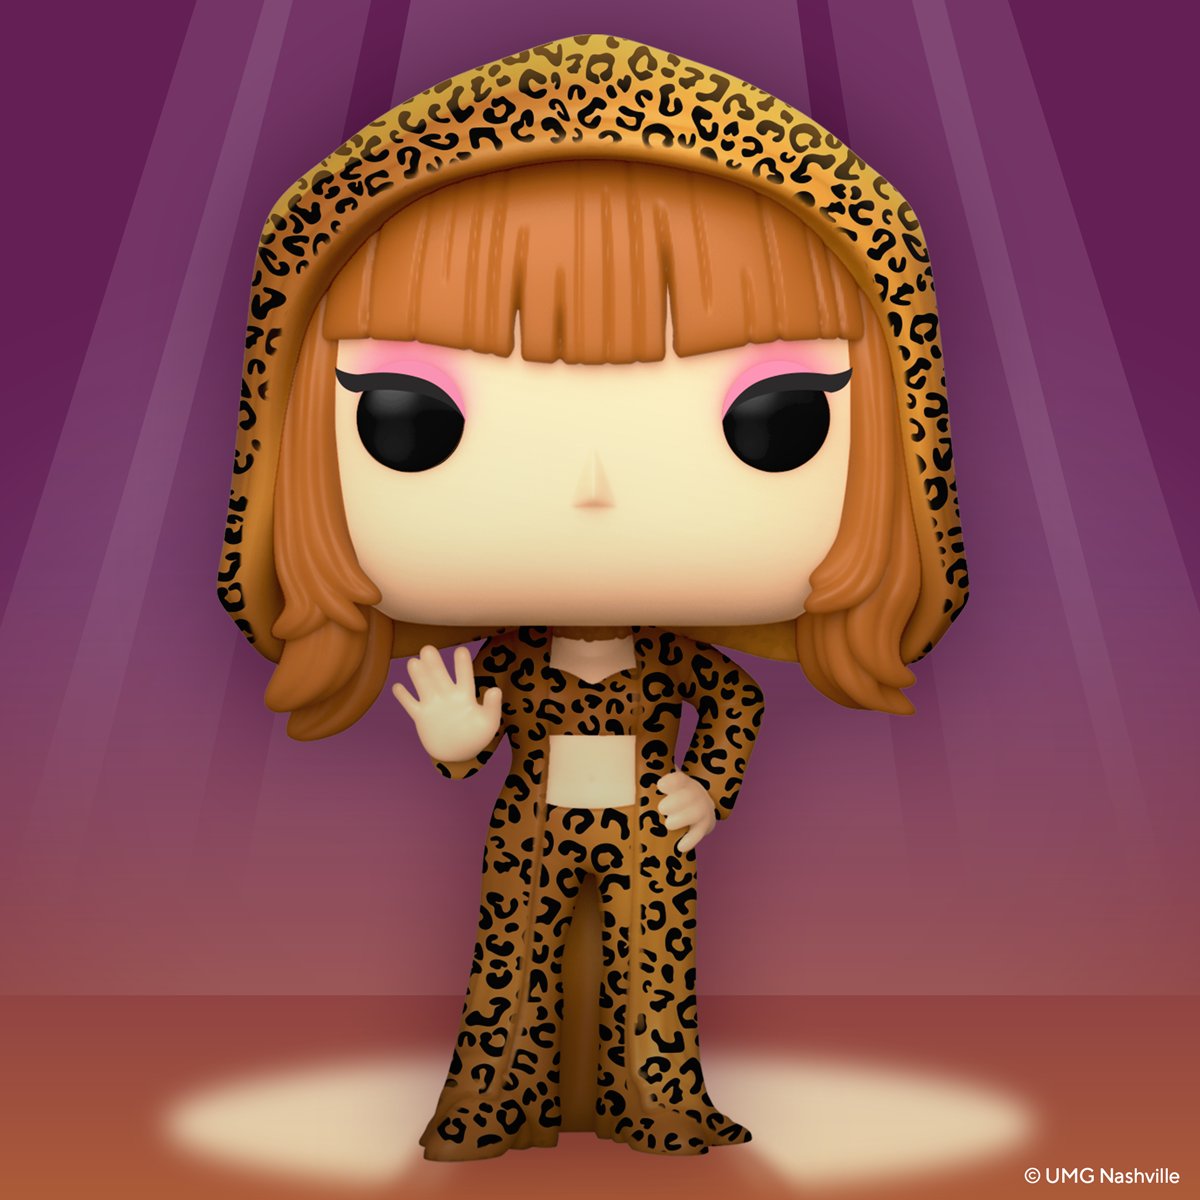 Shania Twain 💎 on Twitter: "I have my own Pop! @OriginalFunko 😍 Get yours from the Funko Shop now: https://t.co/a7zMXSI0v4… "